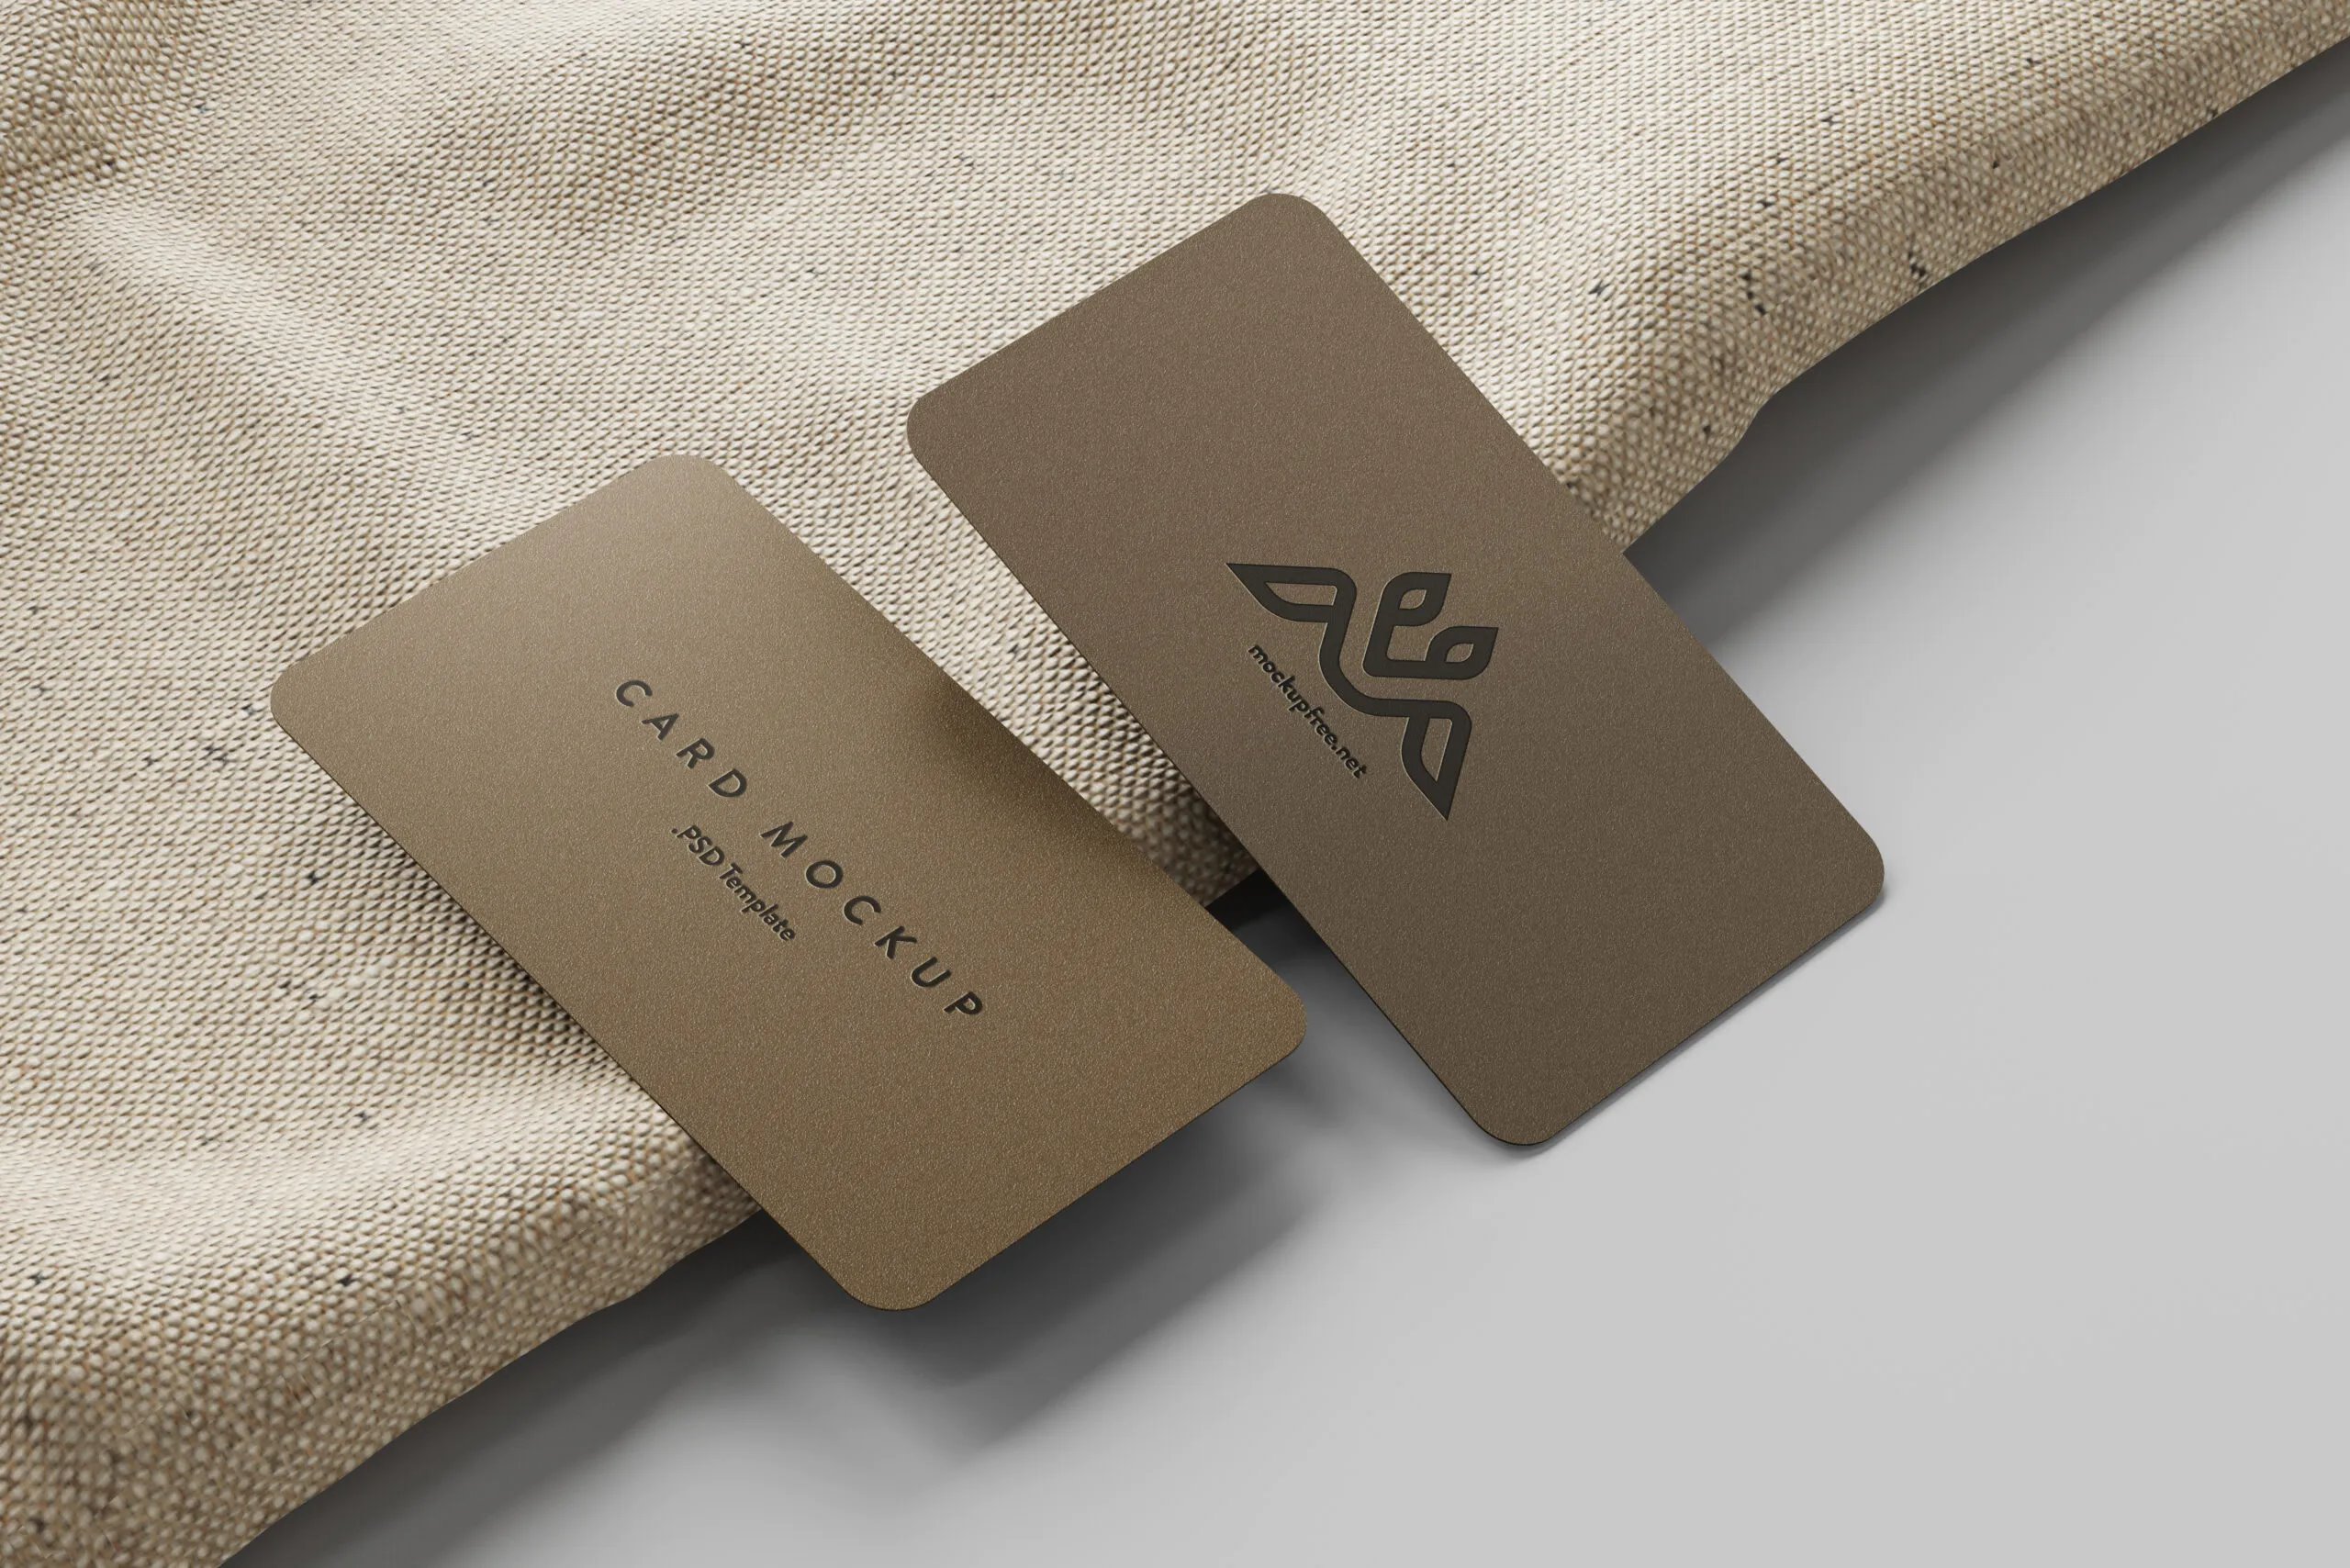 5 Business Cards Mockups On Burlap Sack in Perspective Sights FREE PSD